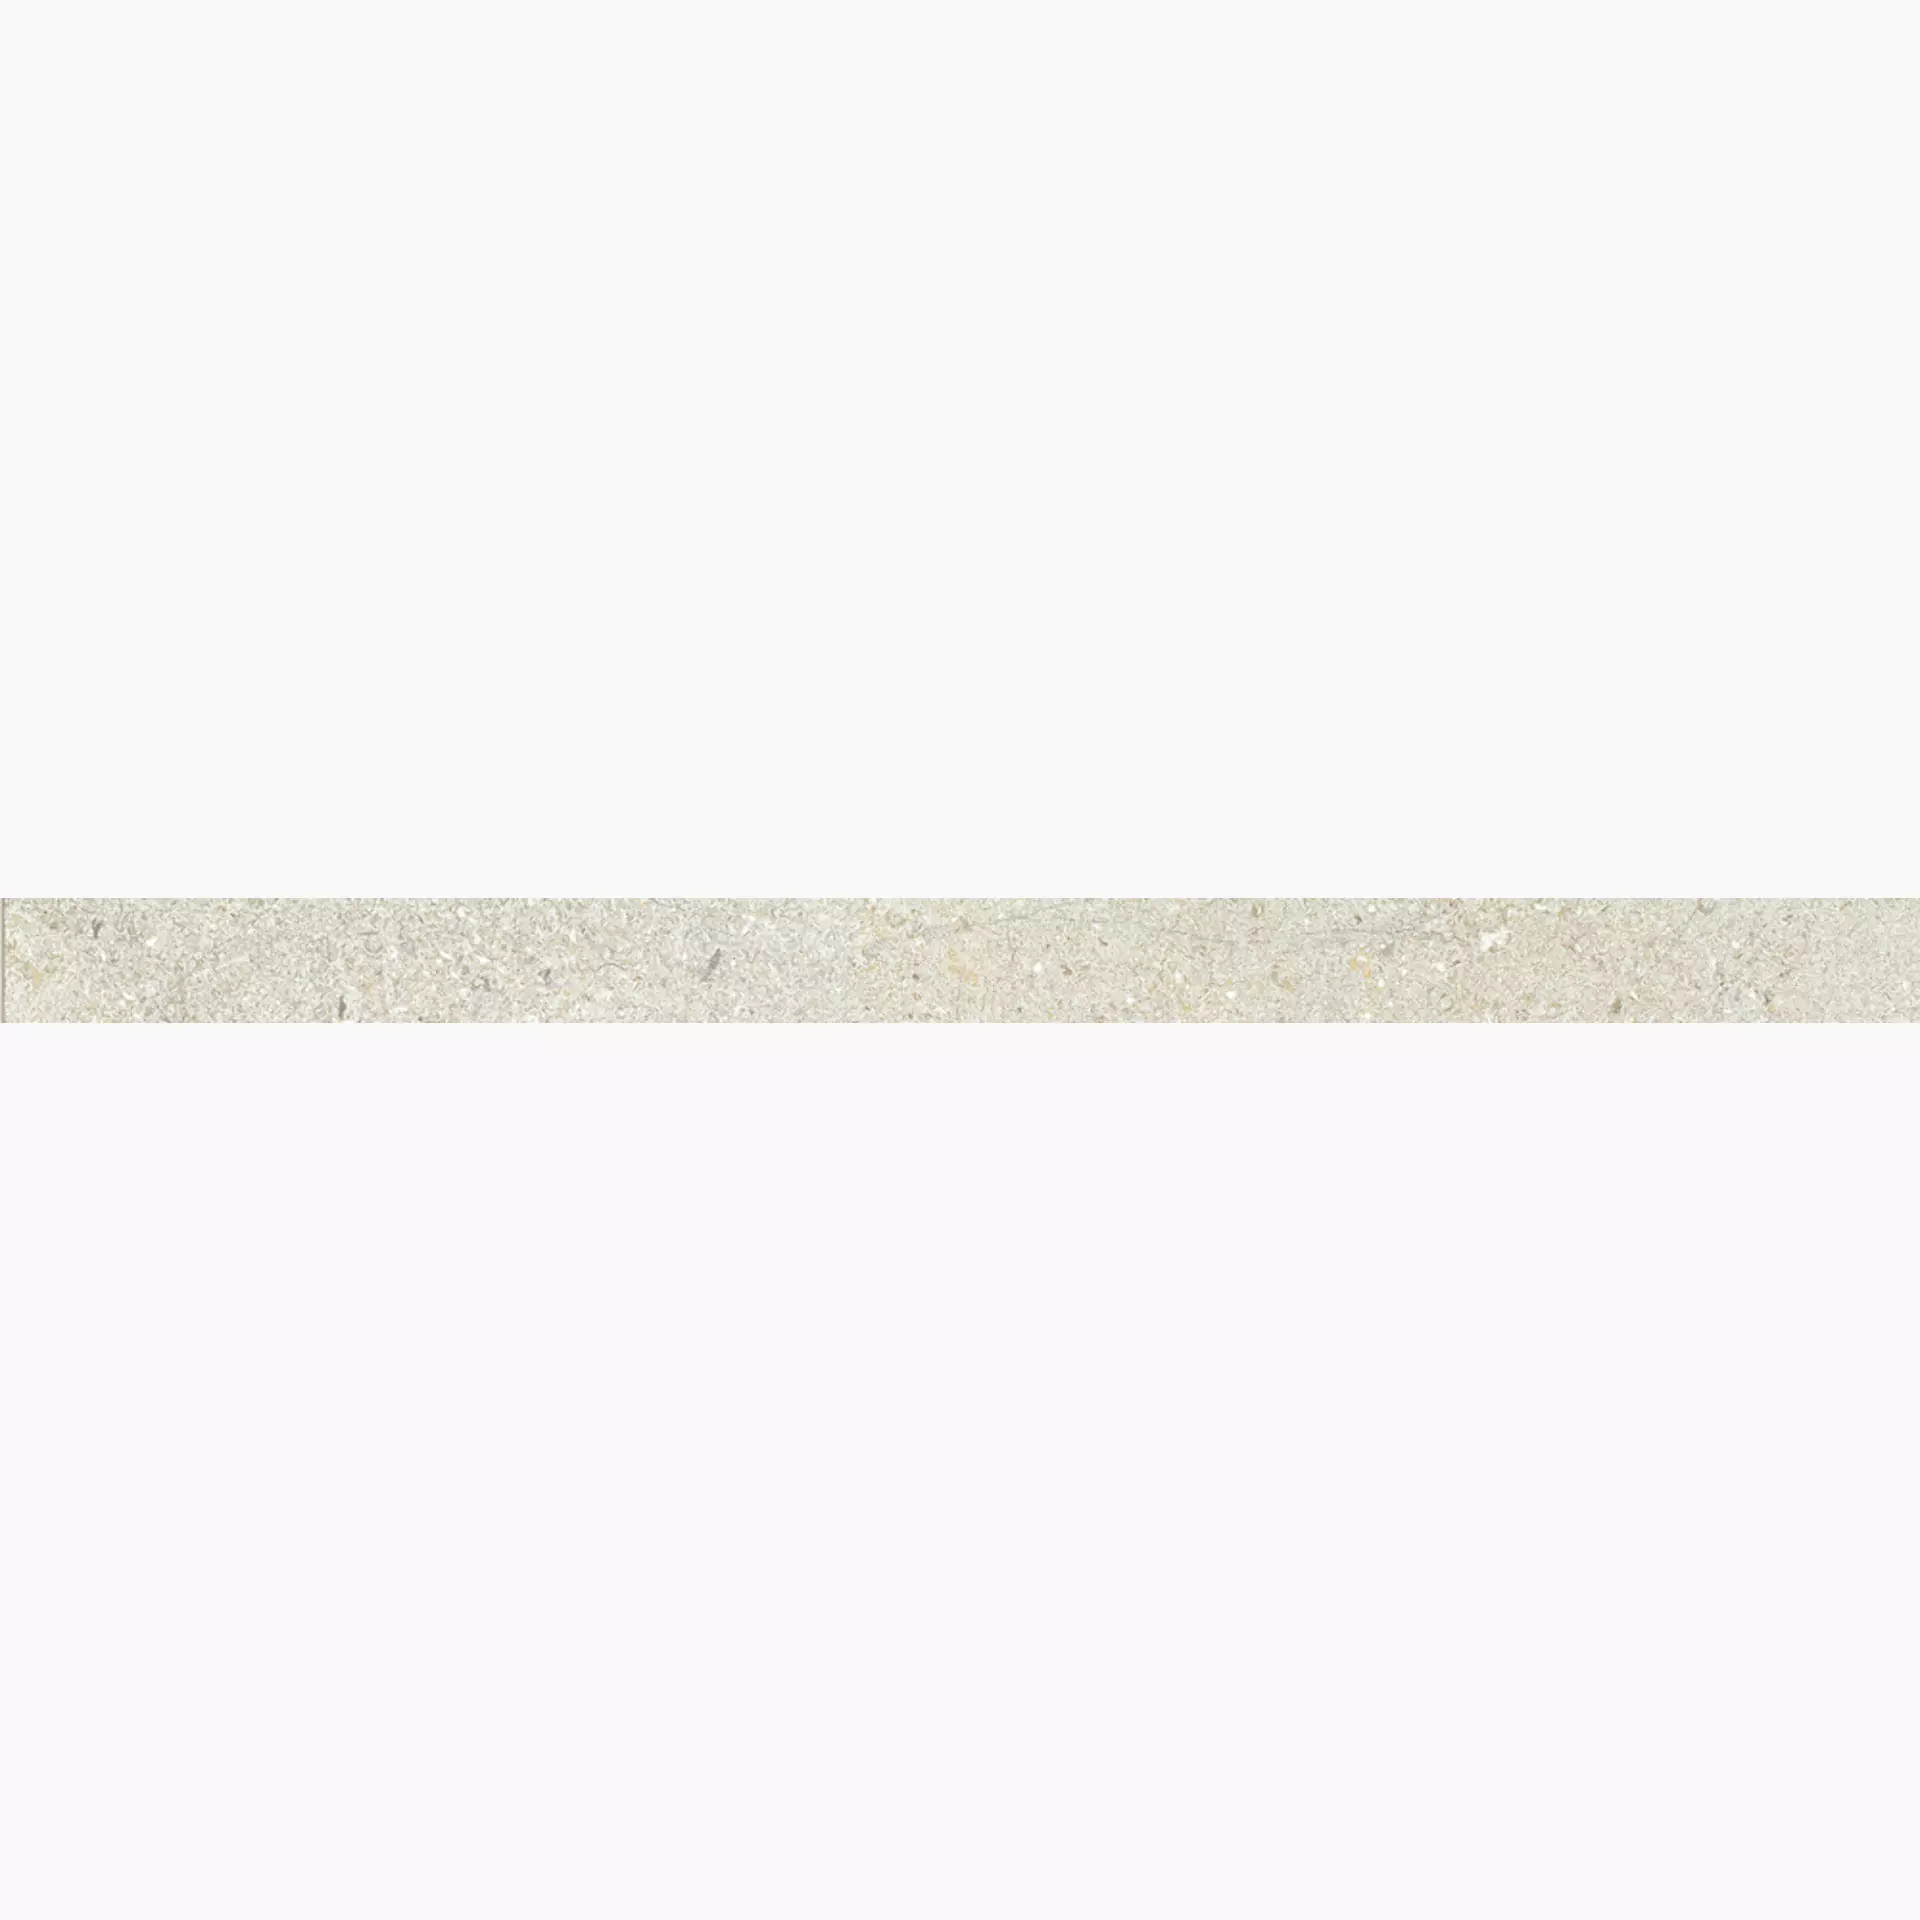 Ariostea Astra Full Body Ice Naturale Skirting board B100653T 6,5x100cm rectified 6mm